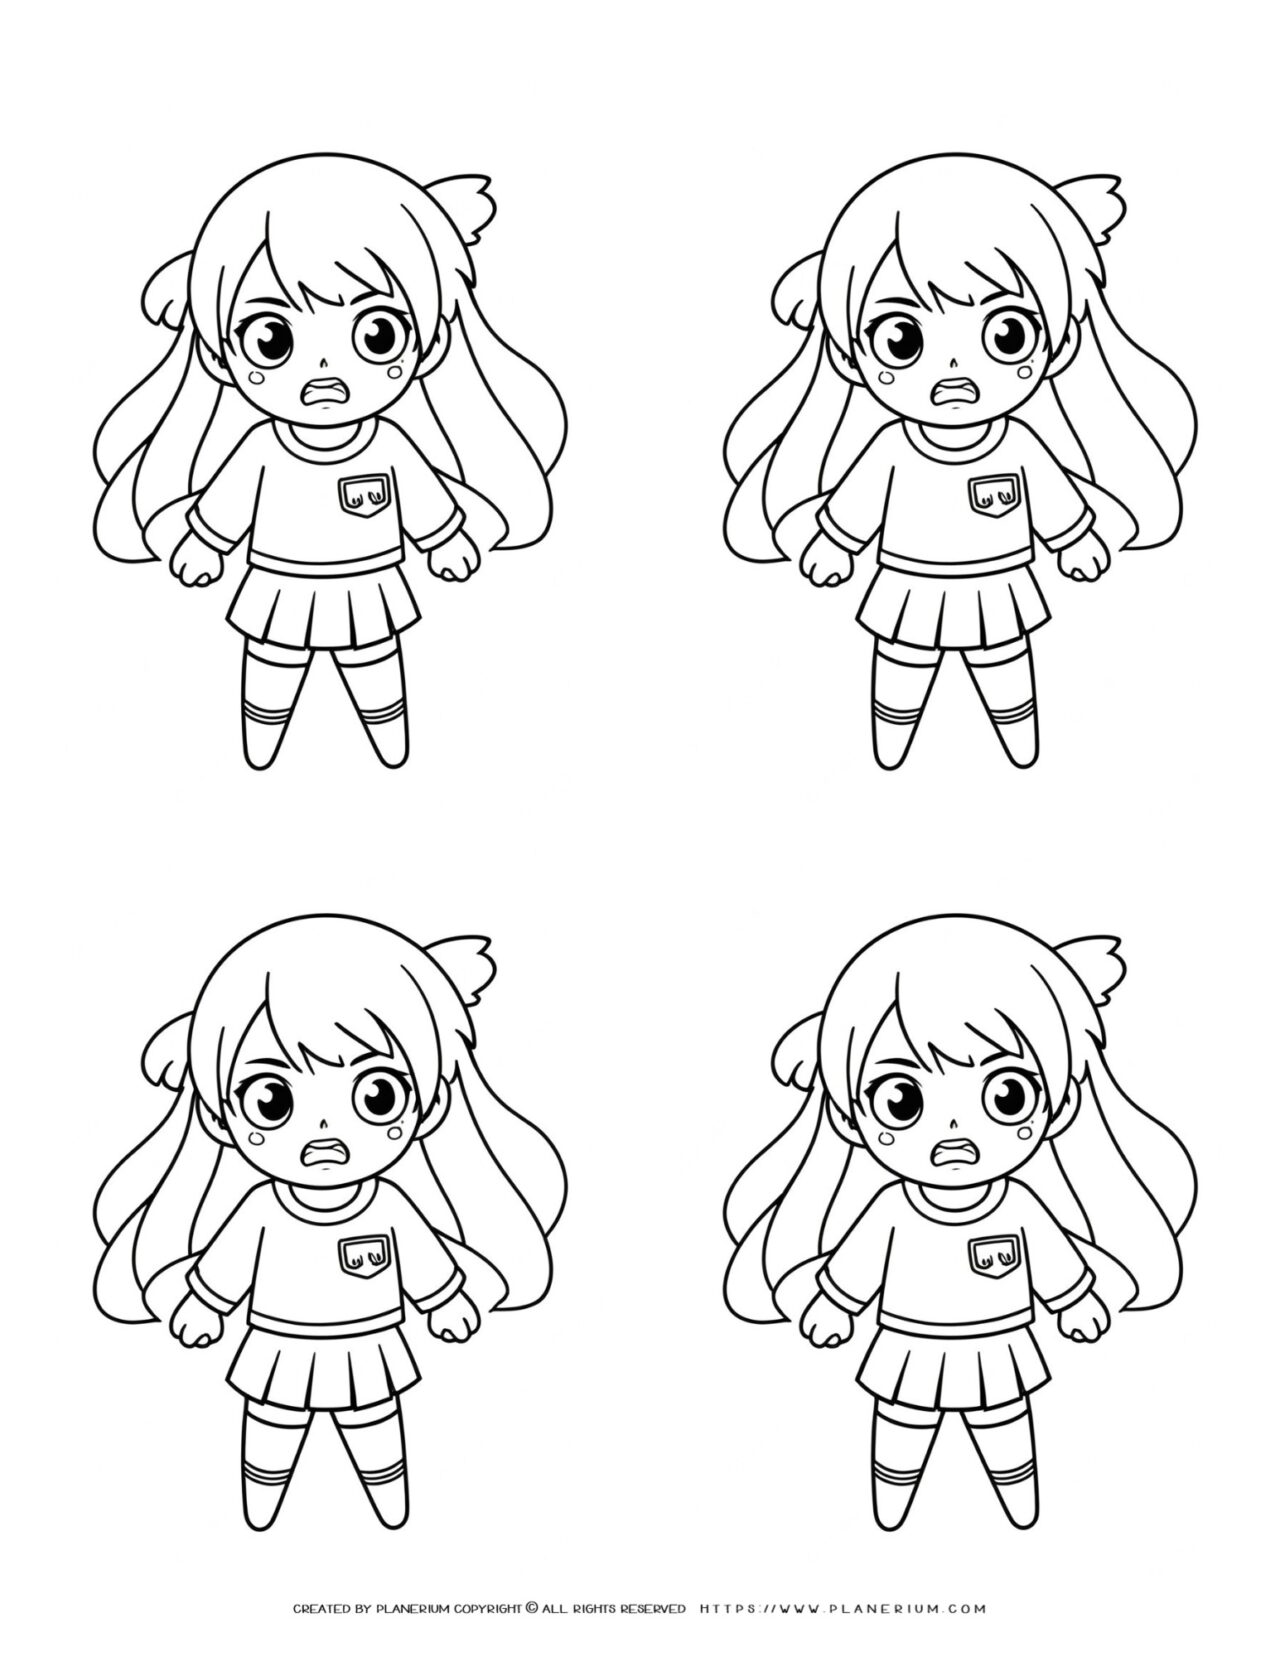 four-angry-girl-outlines-anime-style